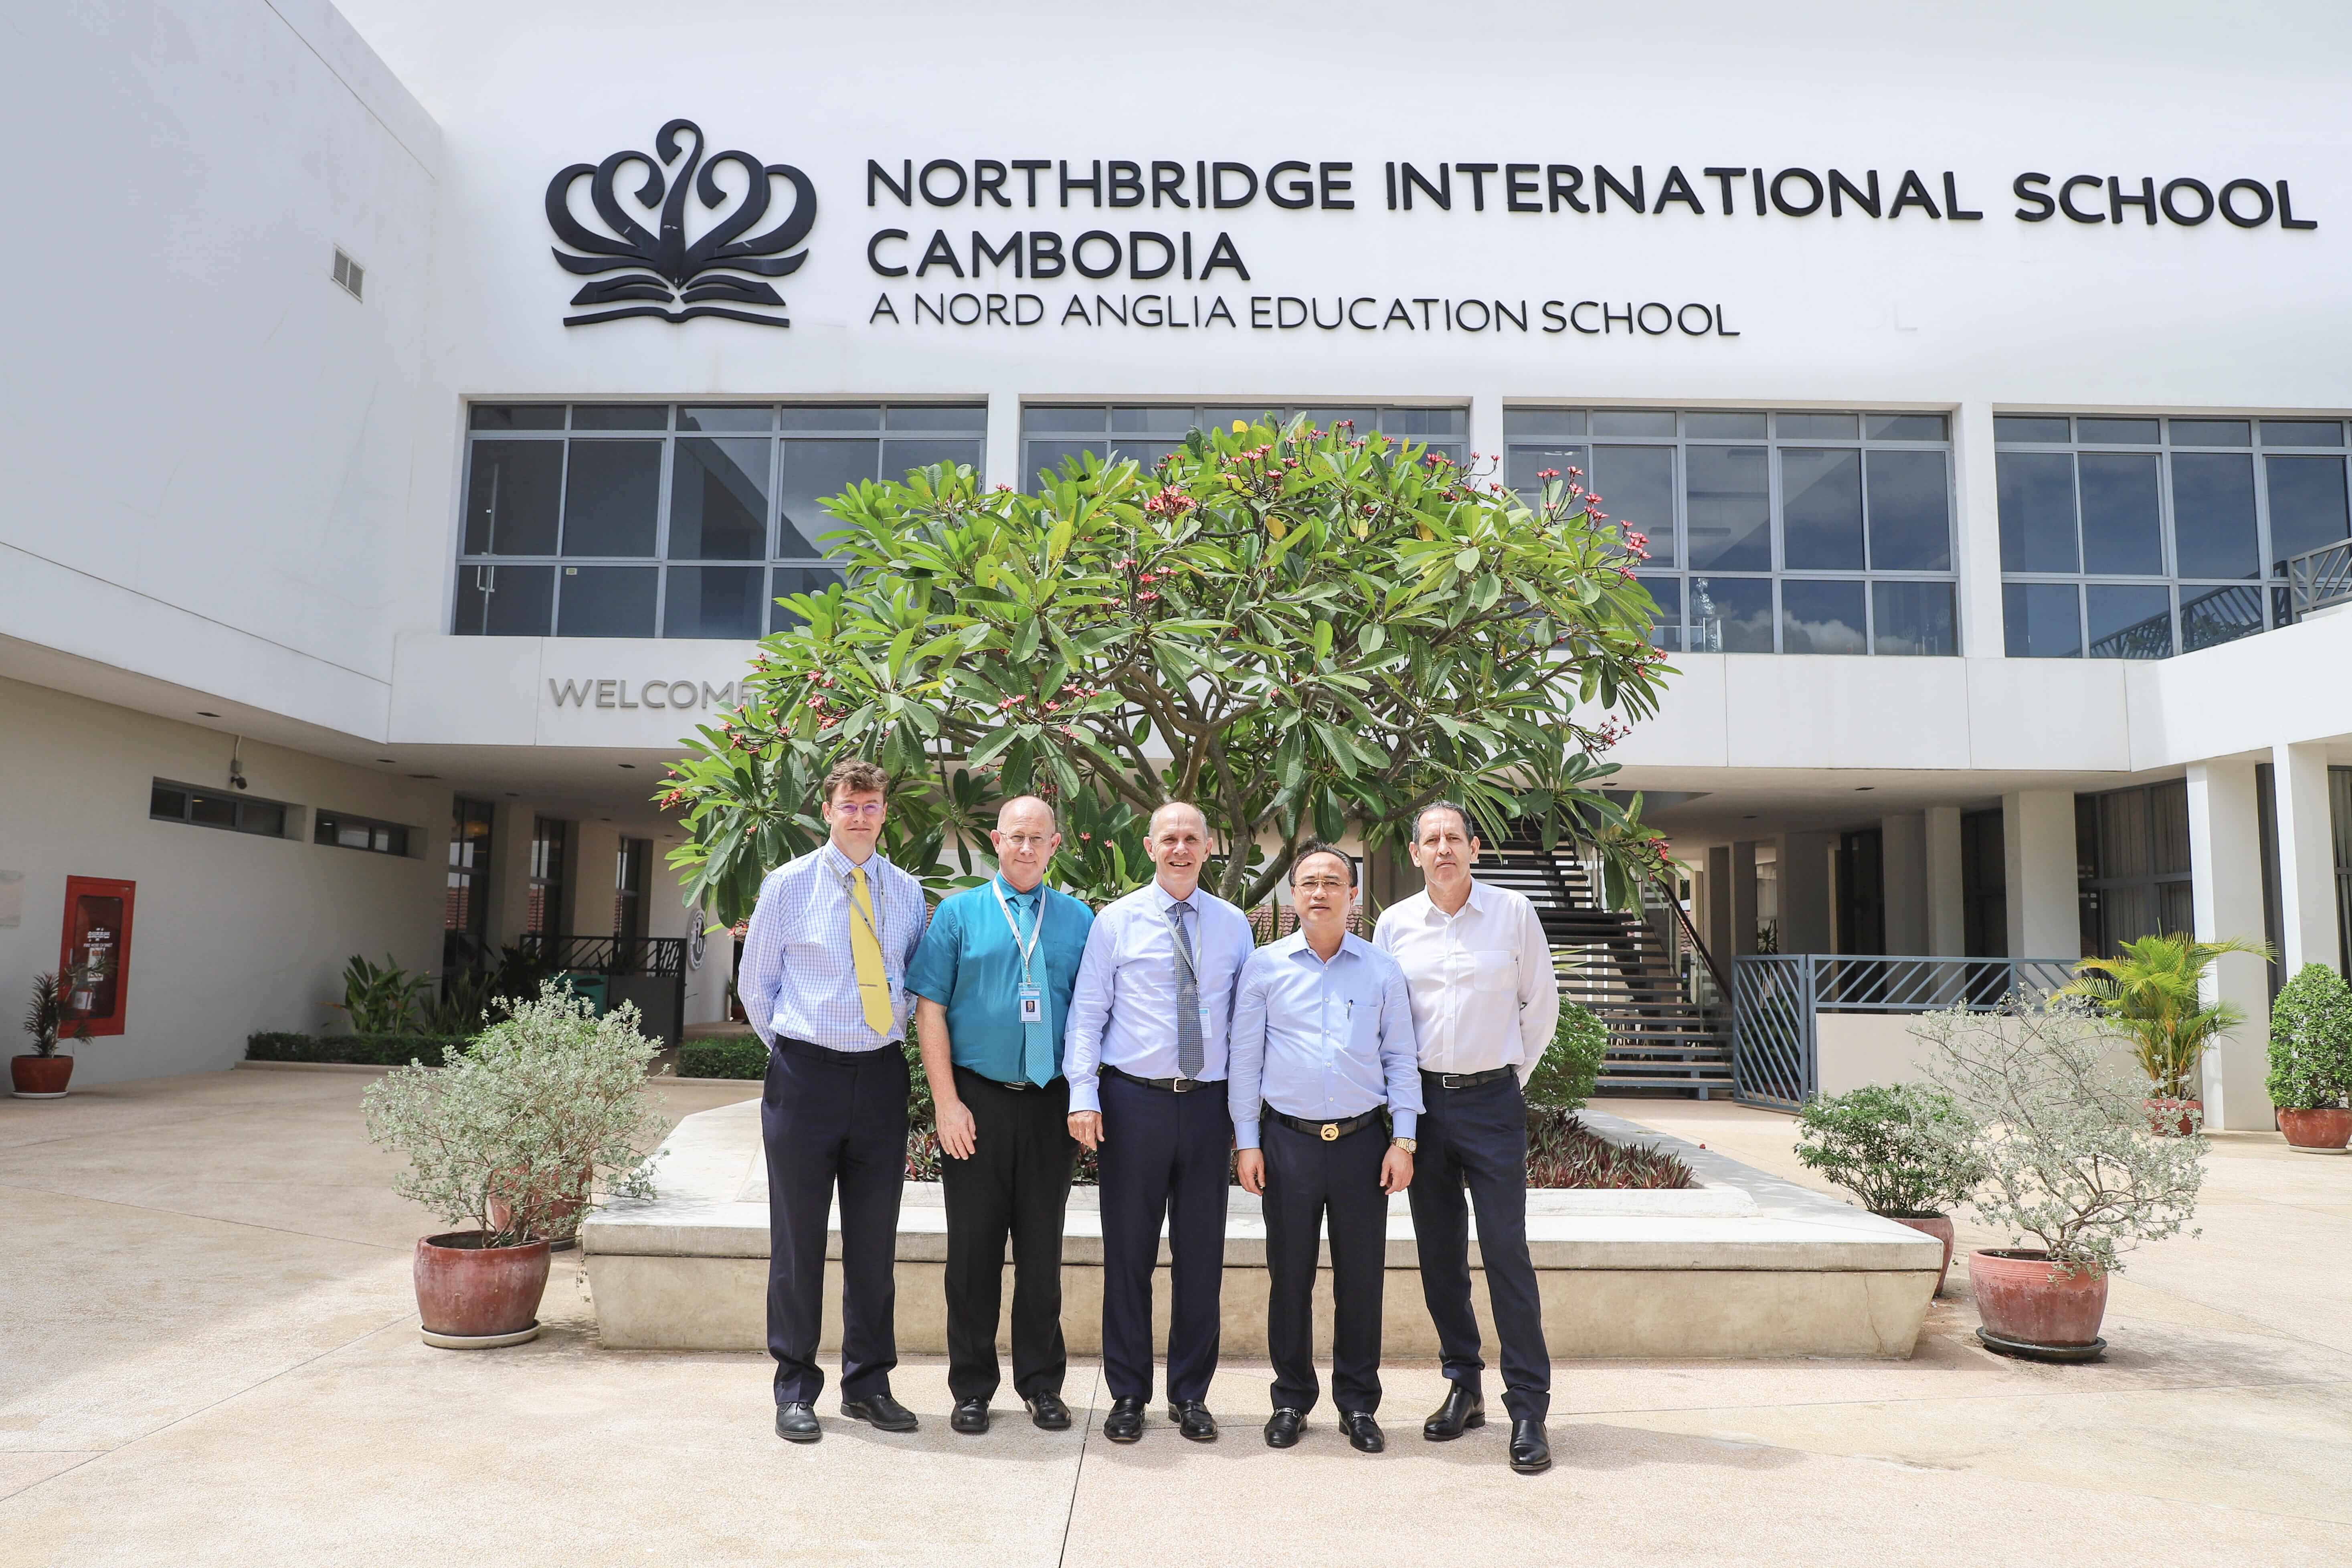 Royal Group and Nord Anglia CEOs meet to discuss ongoing Cambodian partnership - royal-group-and-nord-anglia-ceos-meet-to-discuss-ongoing-cambodian-partnership